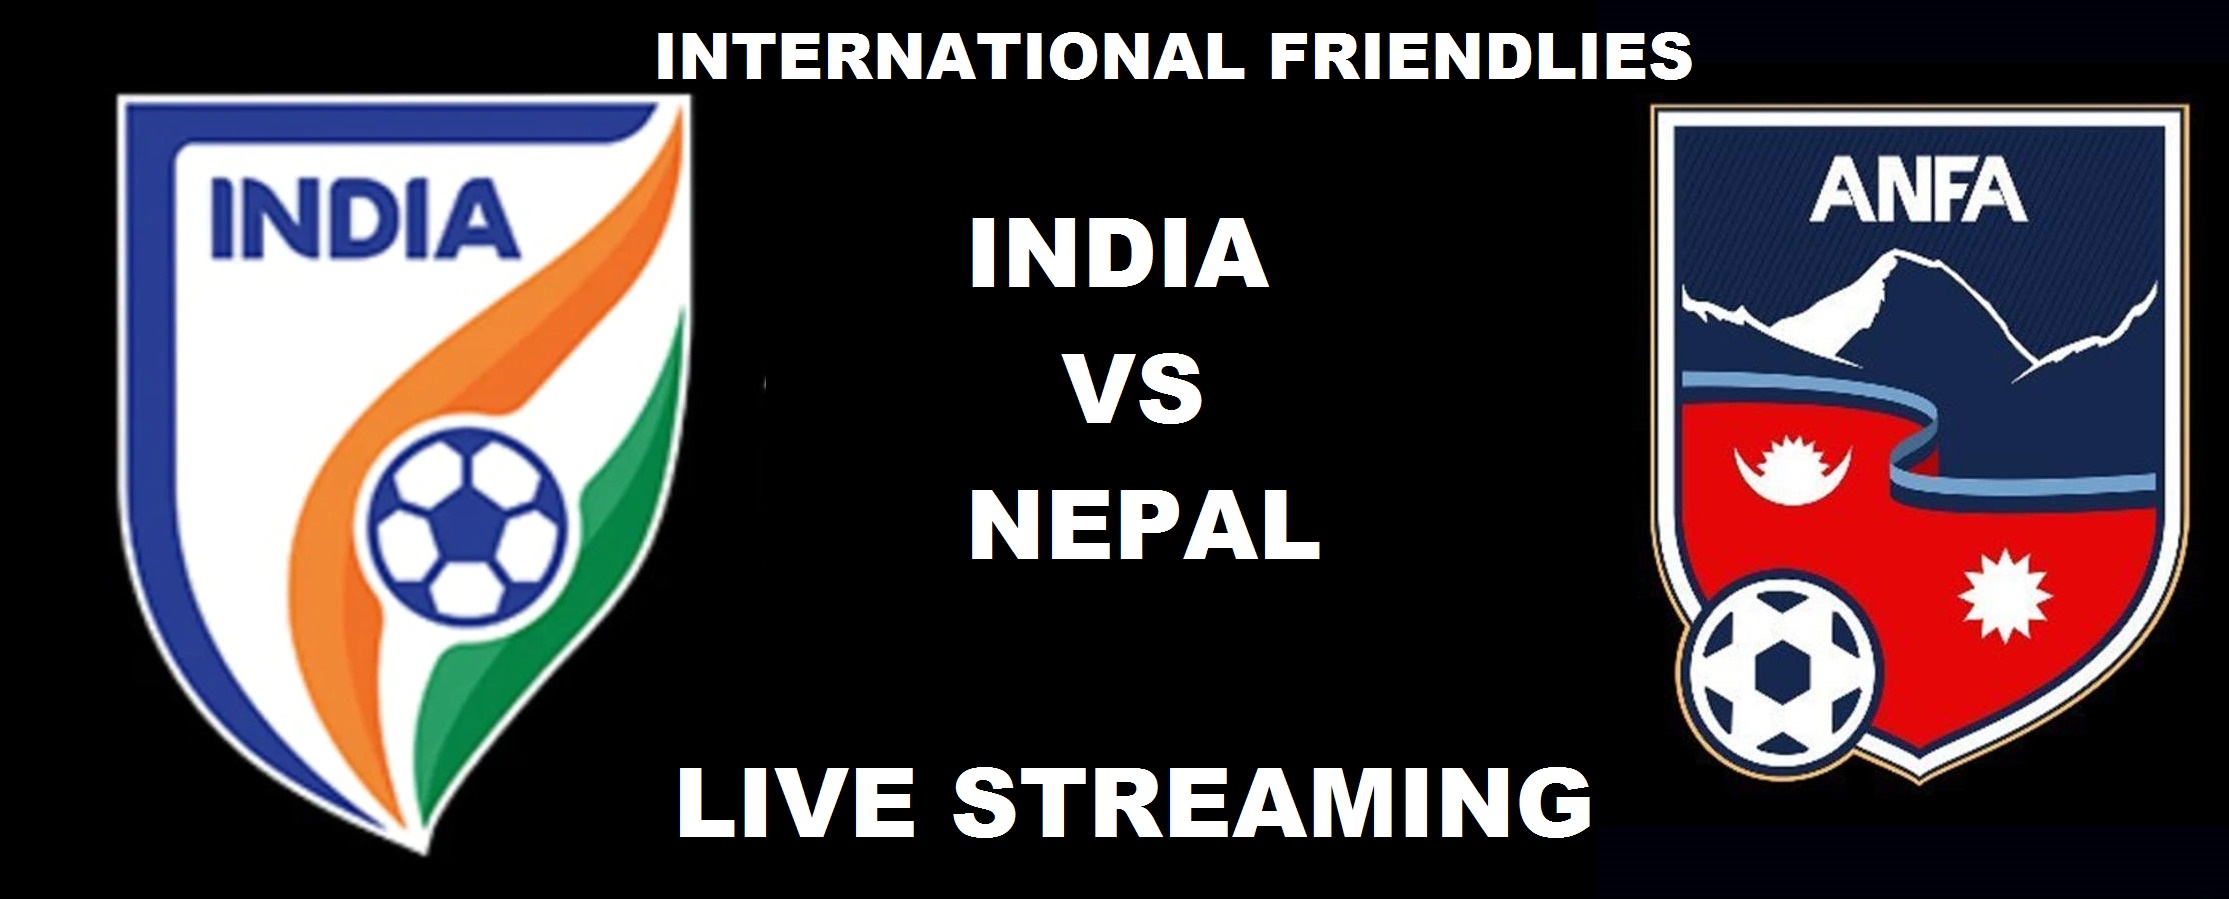 Vs nepal india 6 Differences